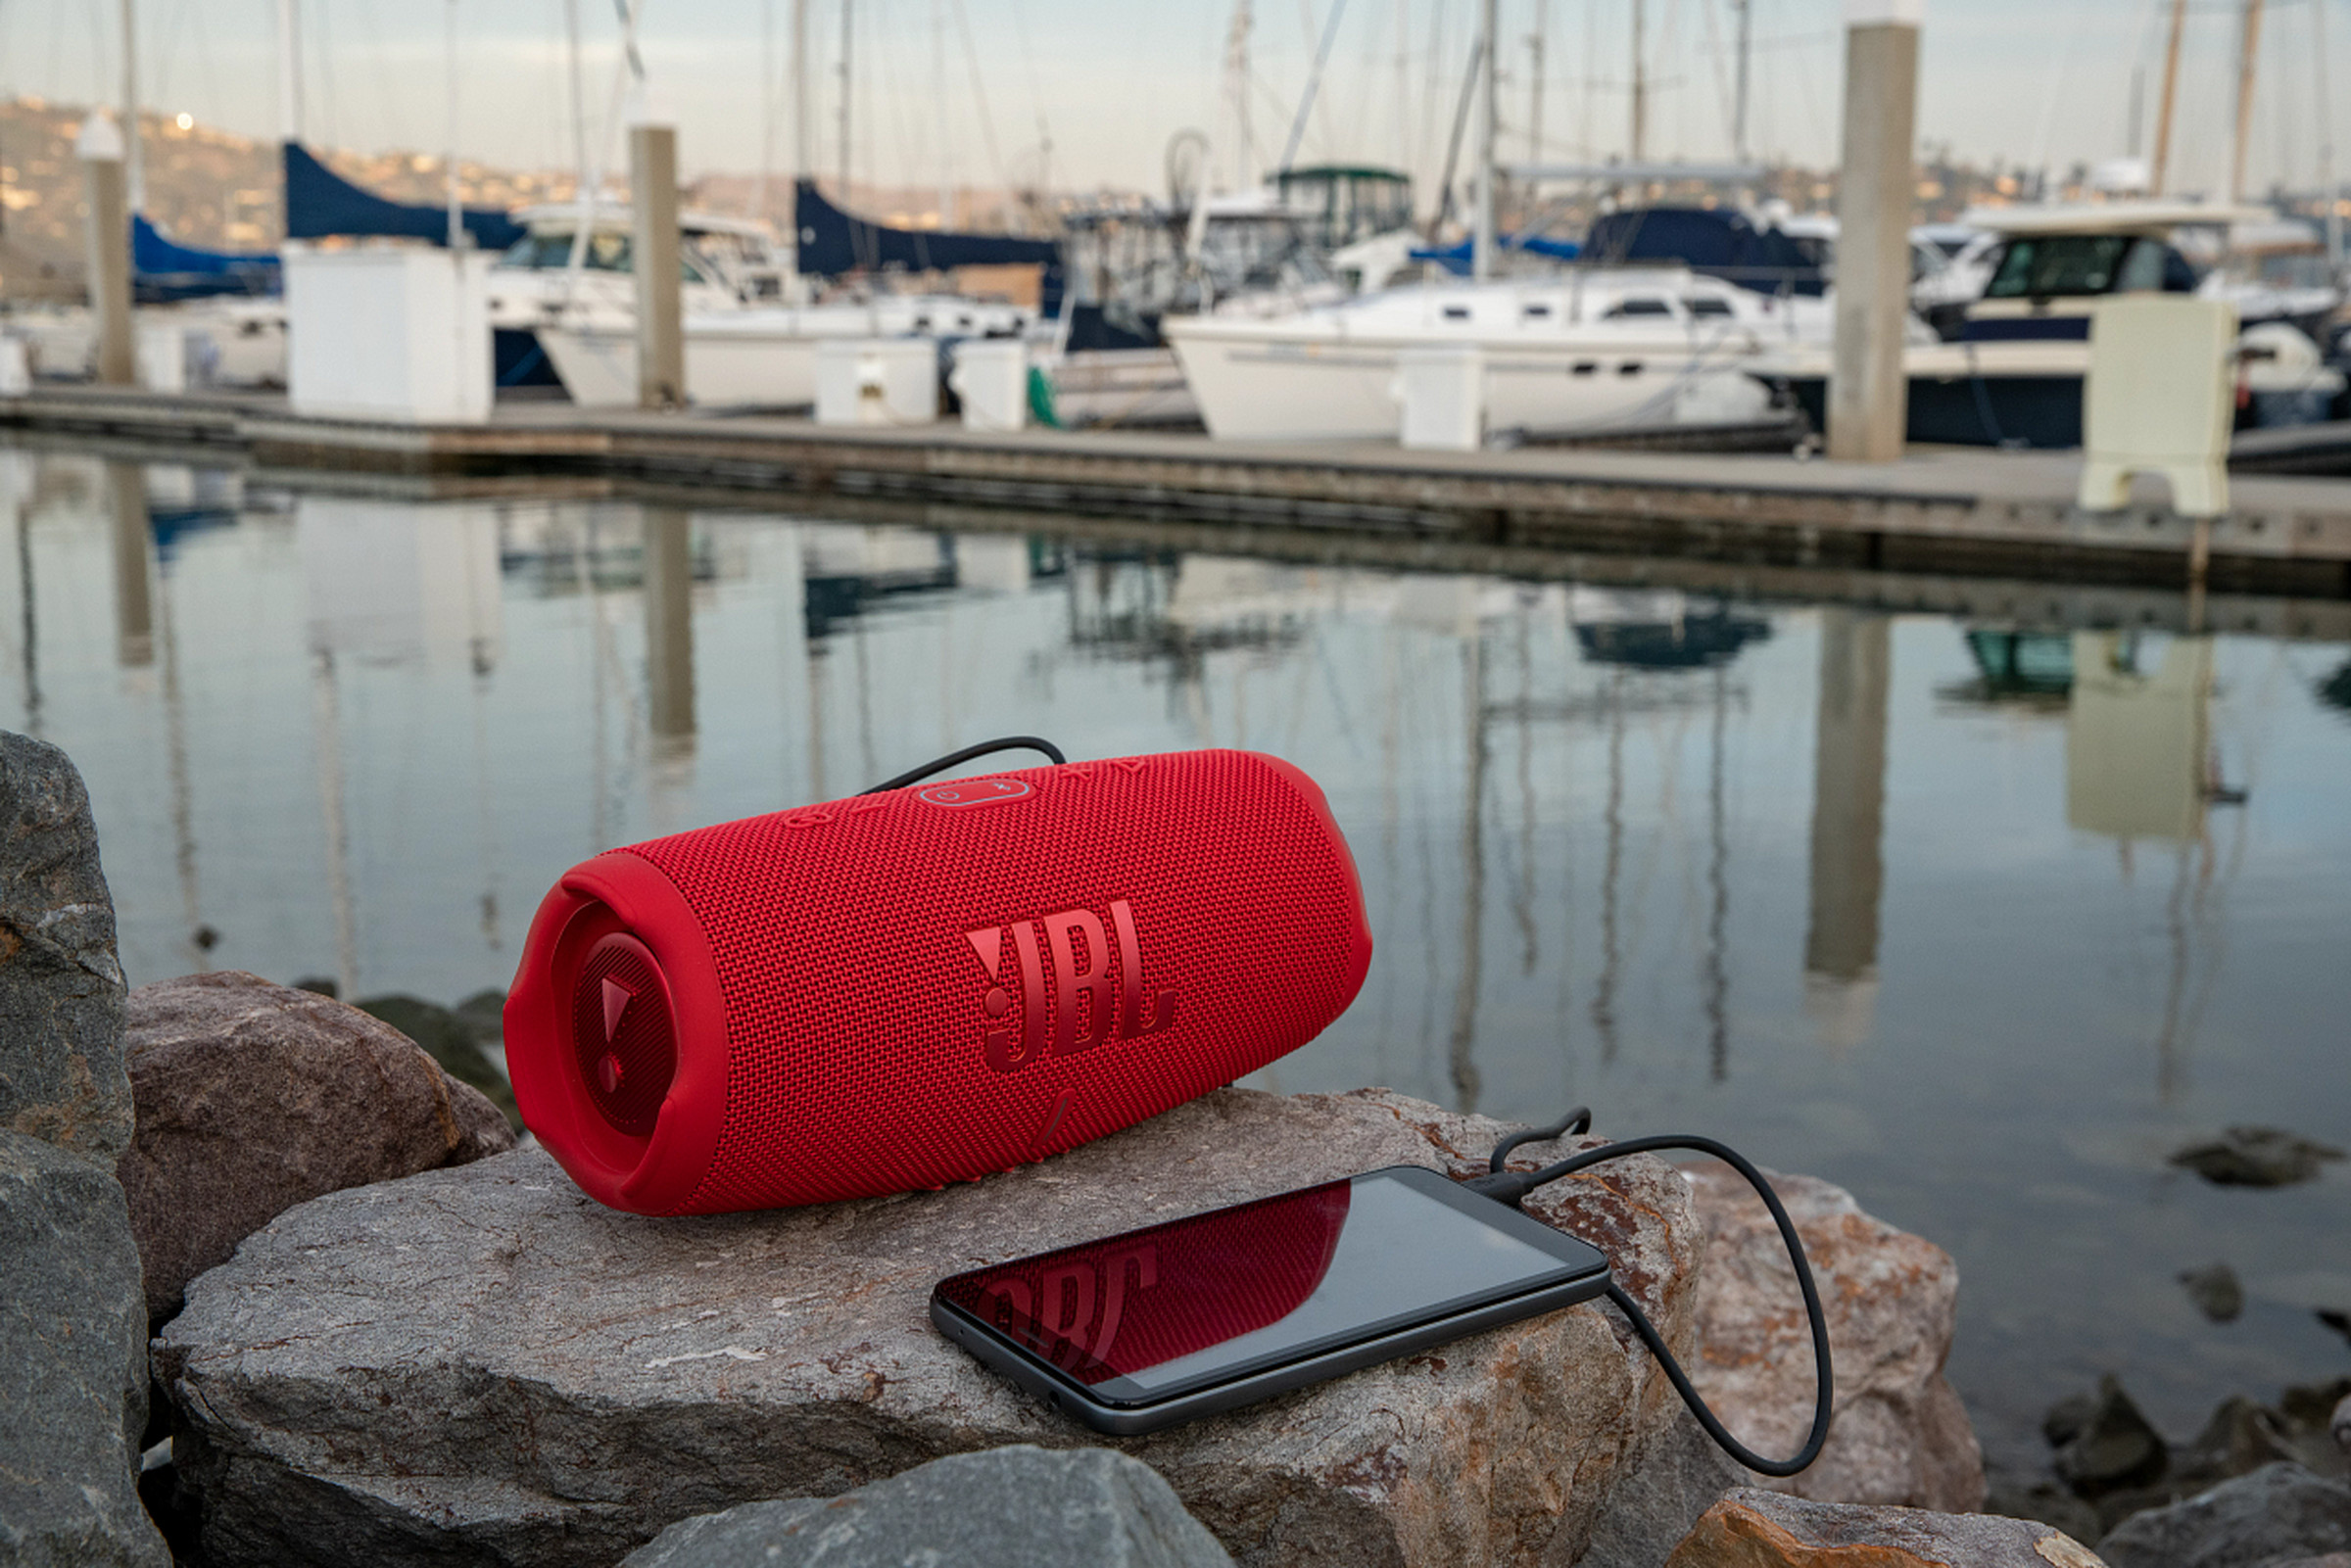 The JBL Charge 5 has a 7,500mAh battery and can charge external devices.